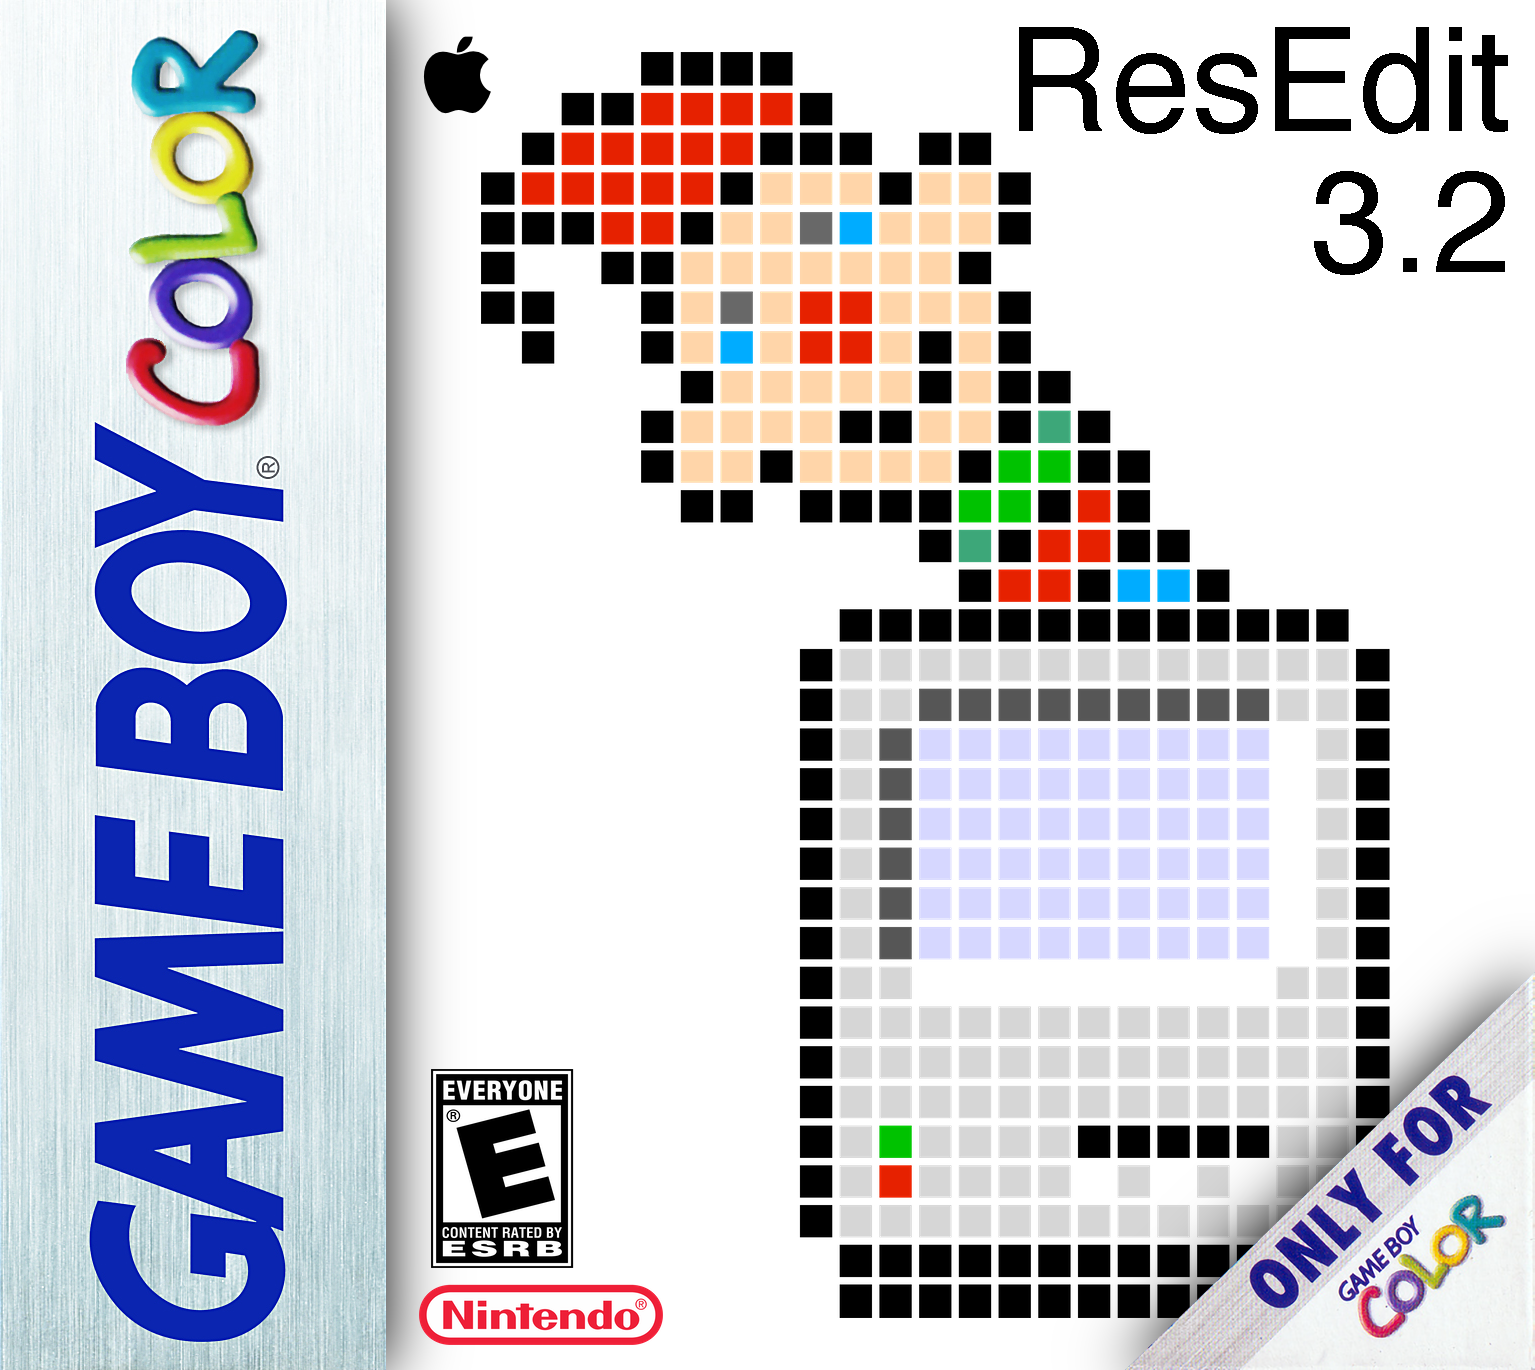 ResEdit 3.2 for the Nintendo Game Boy Color box